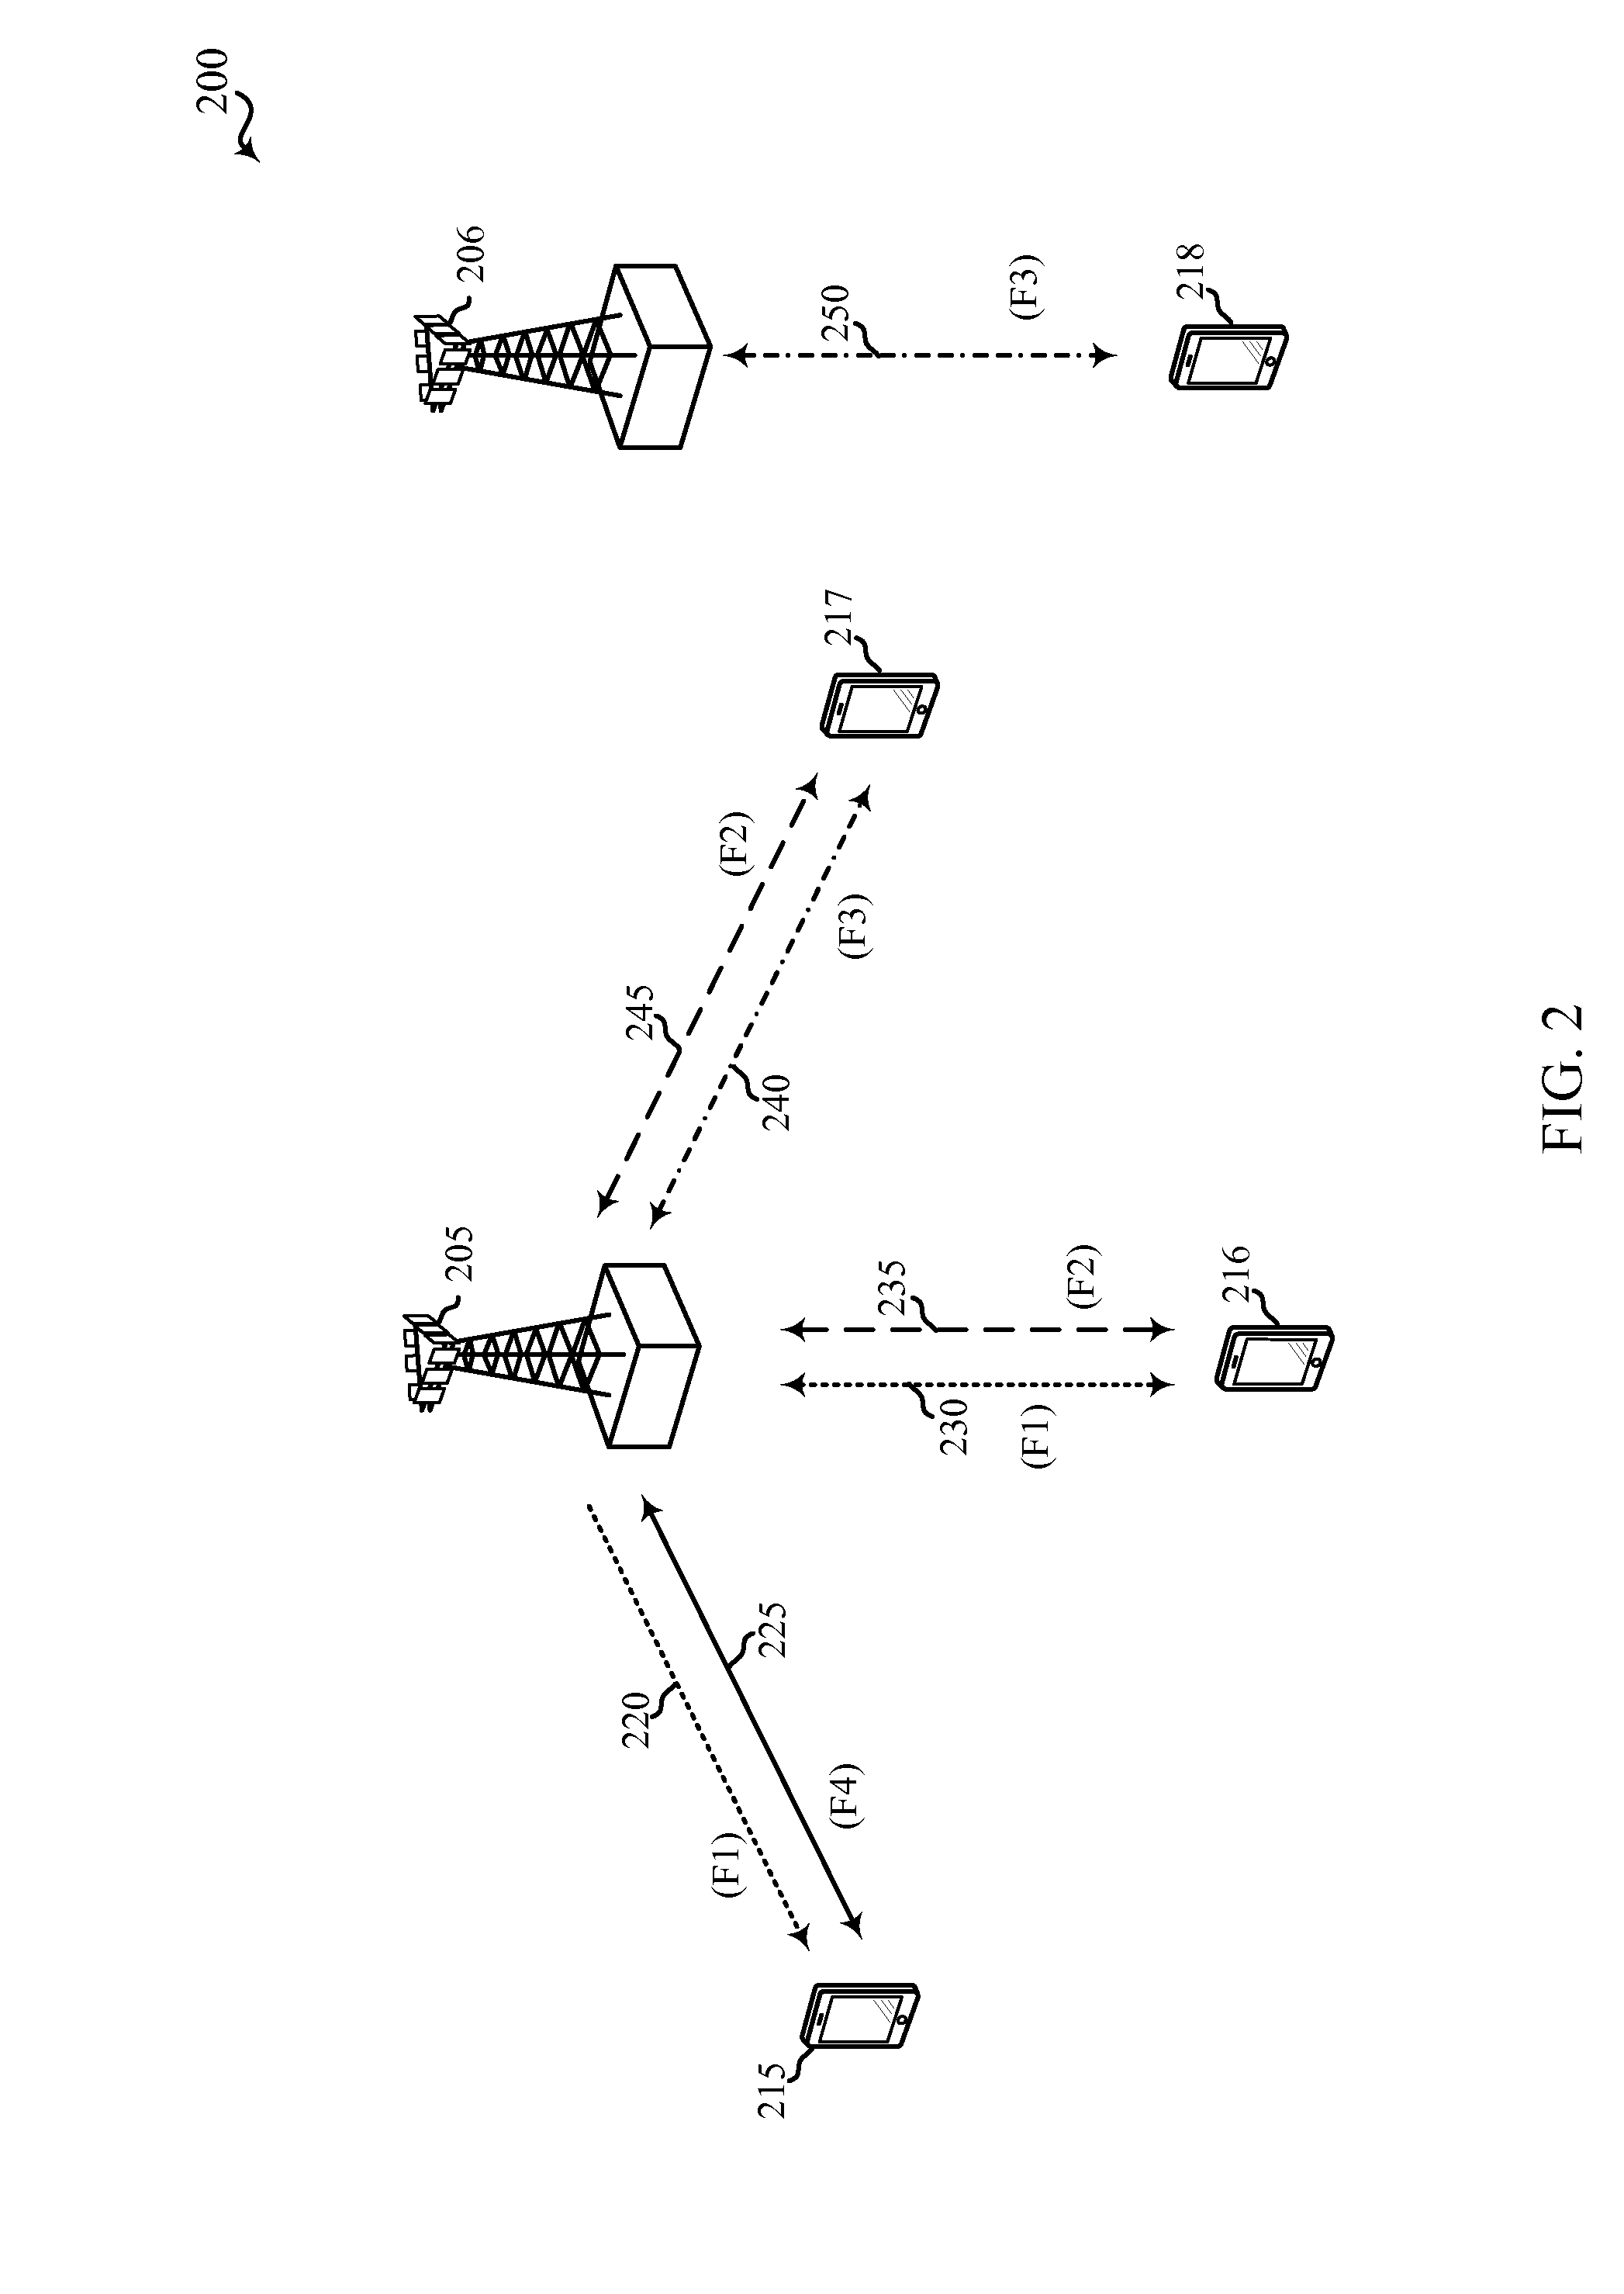 Techniques for transmitting a sounding reference signal or scheduling request over an unlicensed radio frequency spectrum band